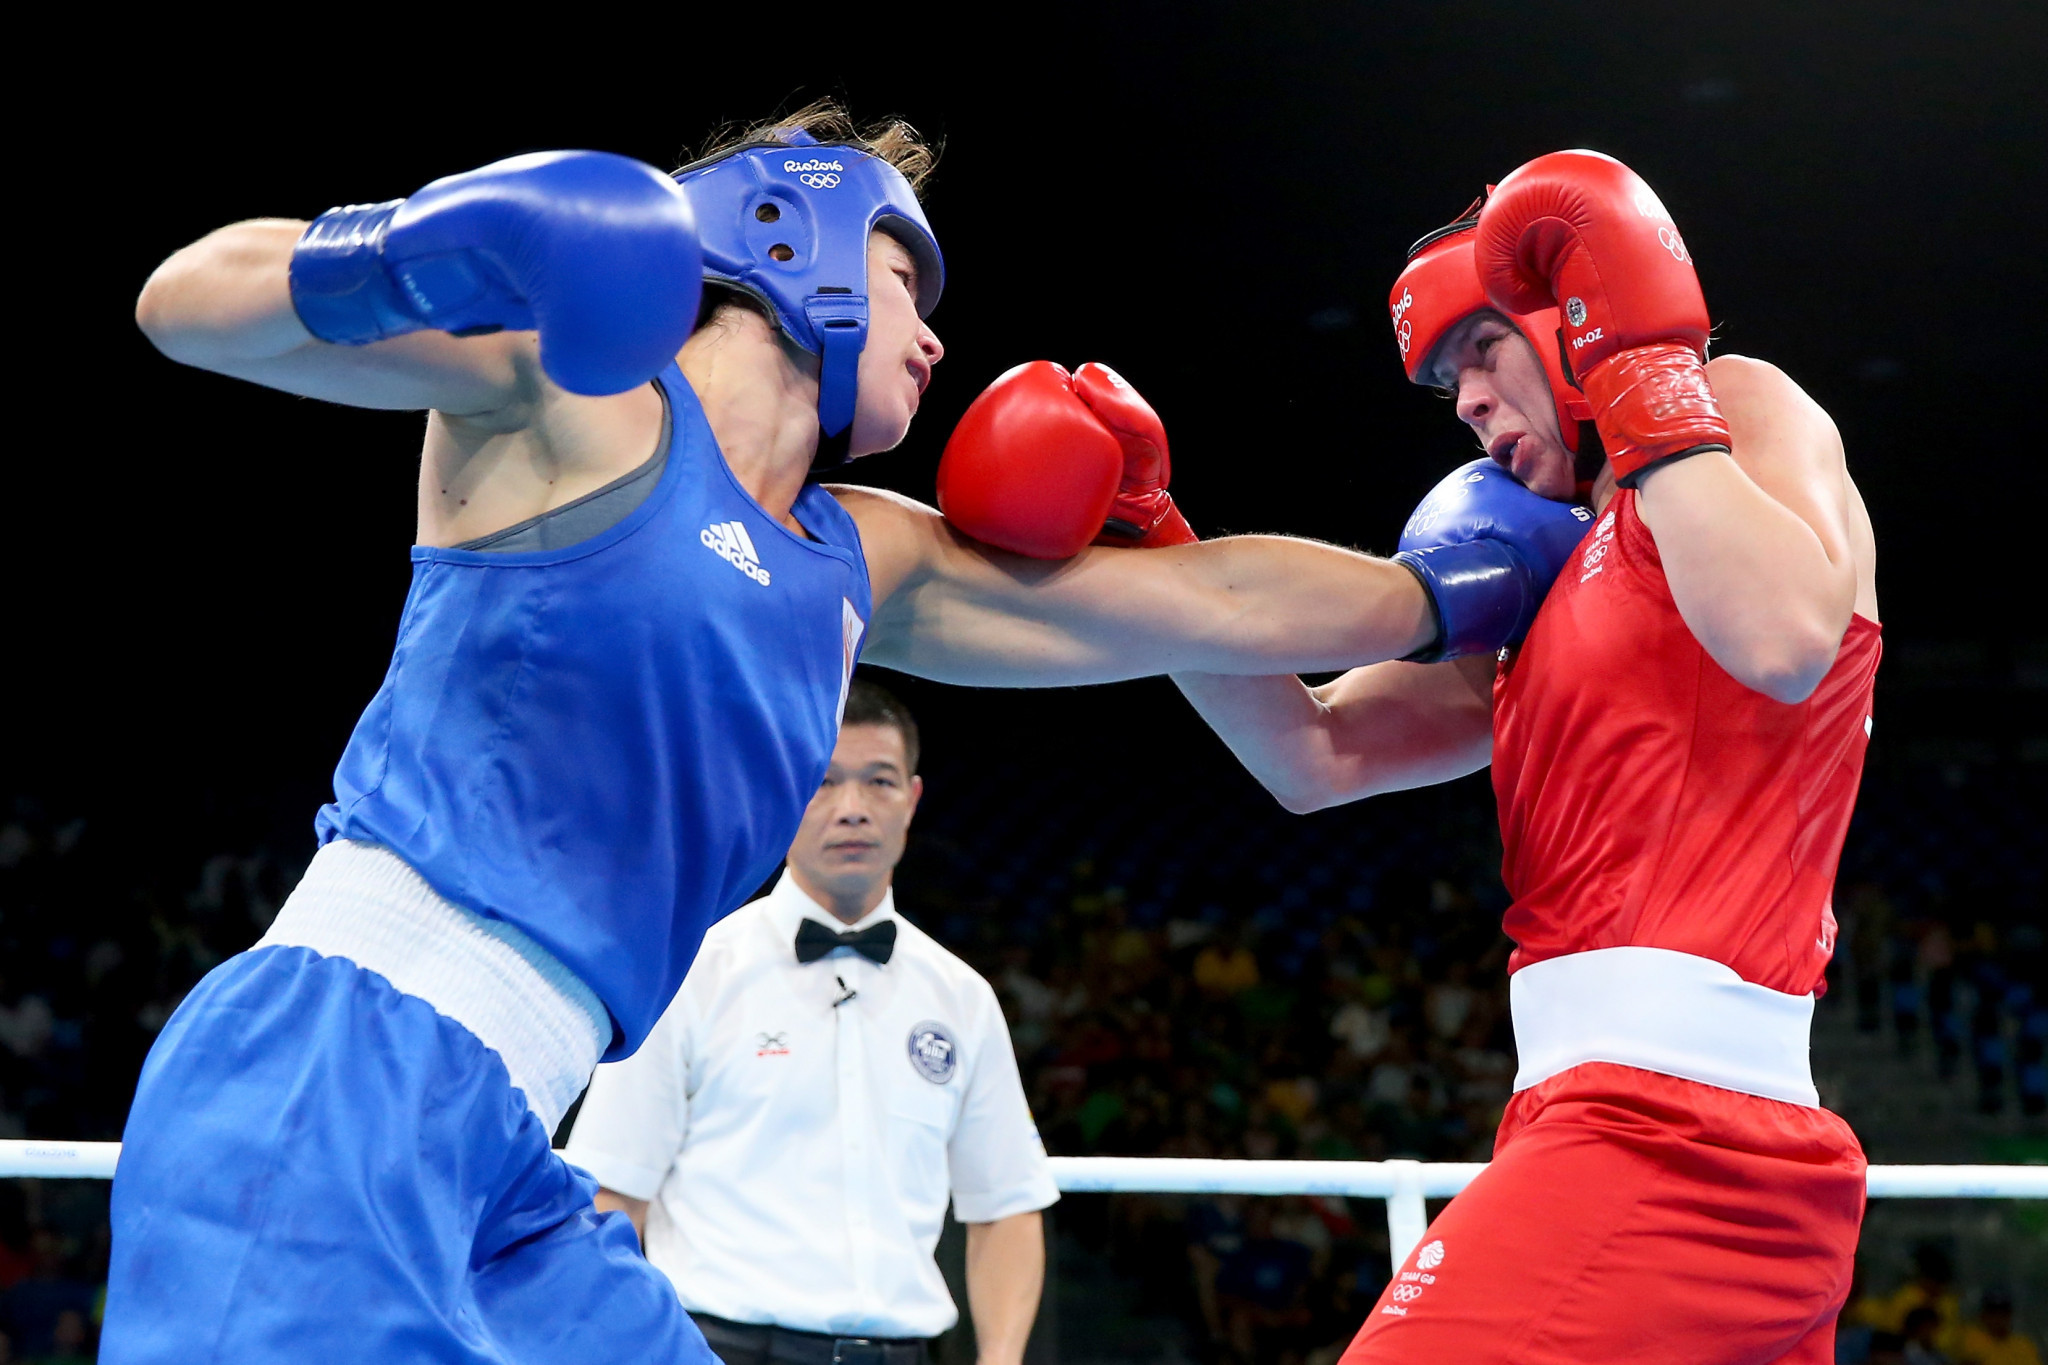 Boxing and AIBA remains in turmoil after it was suspended as the Olympic governing body for the sport by the IOC ©Getty Images